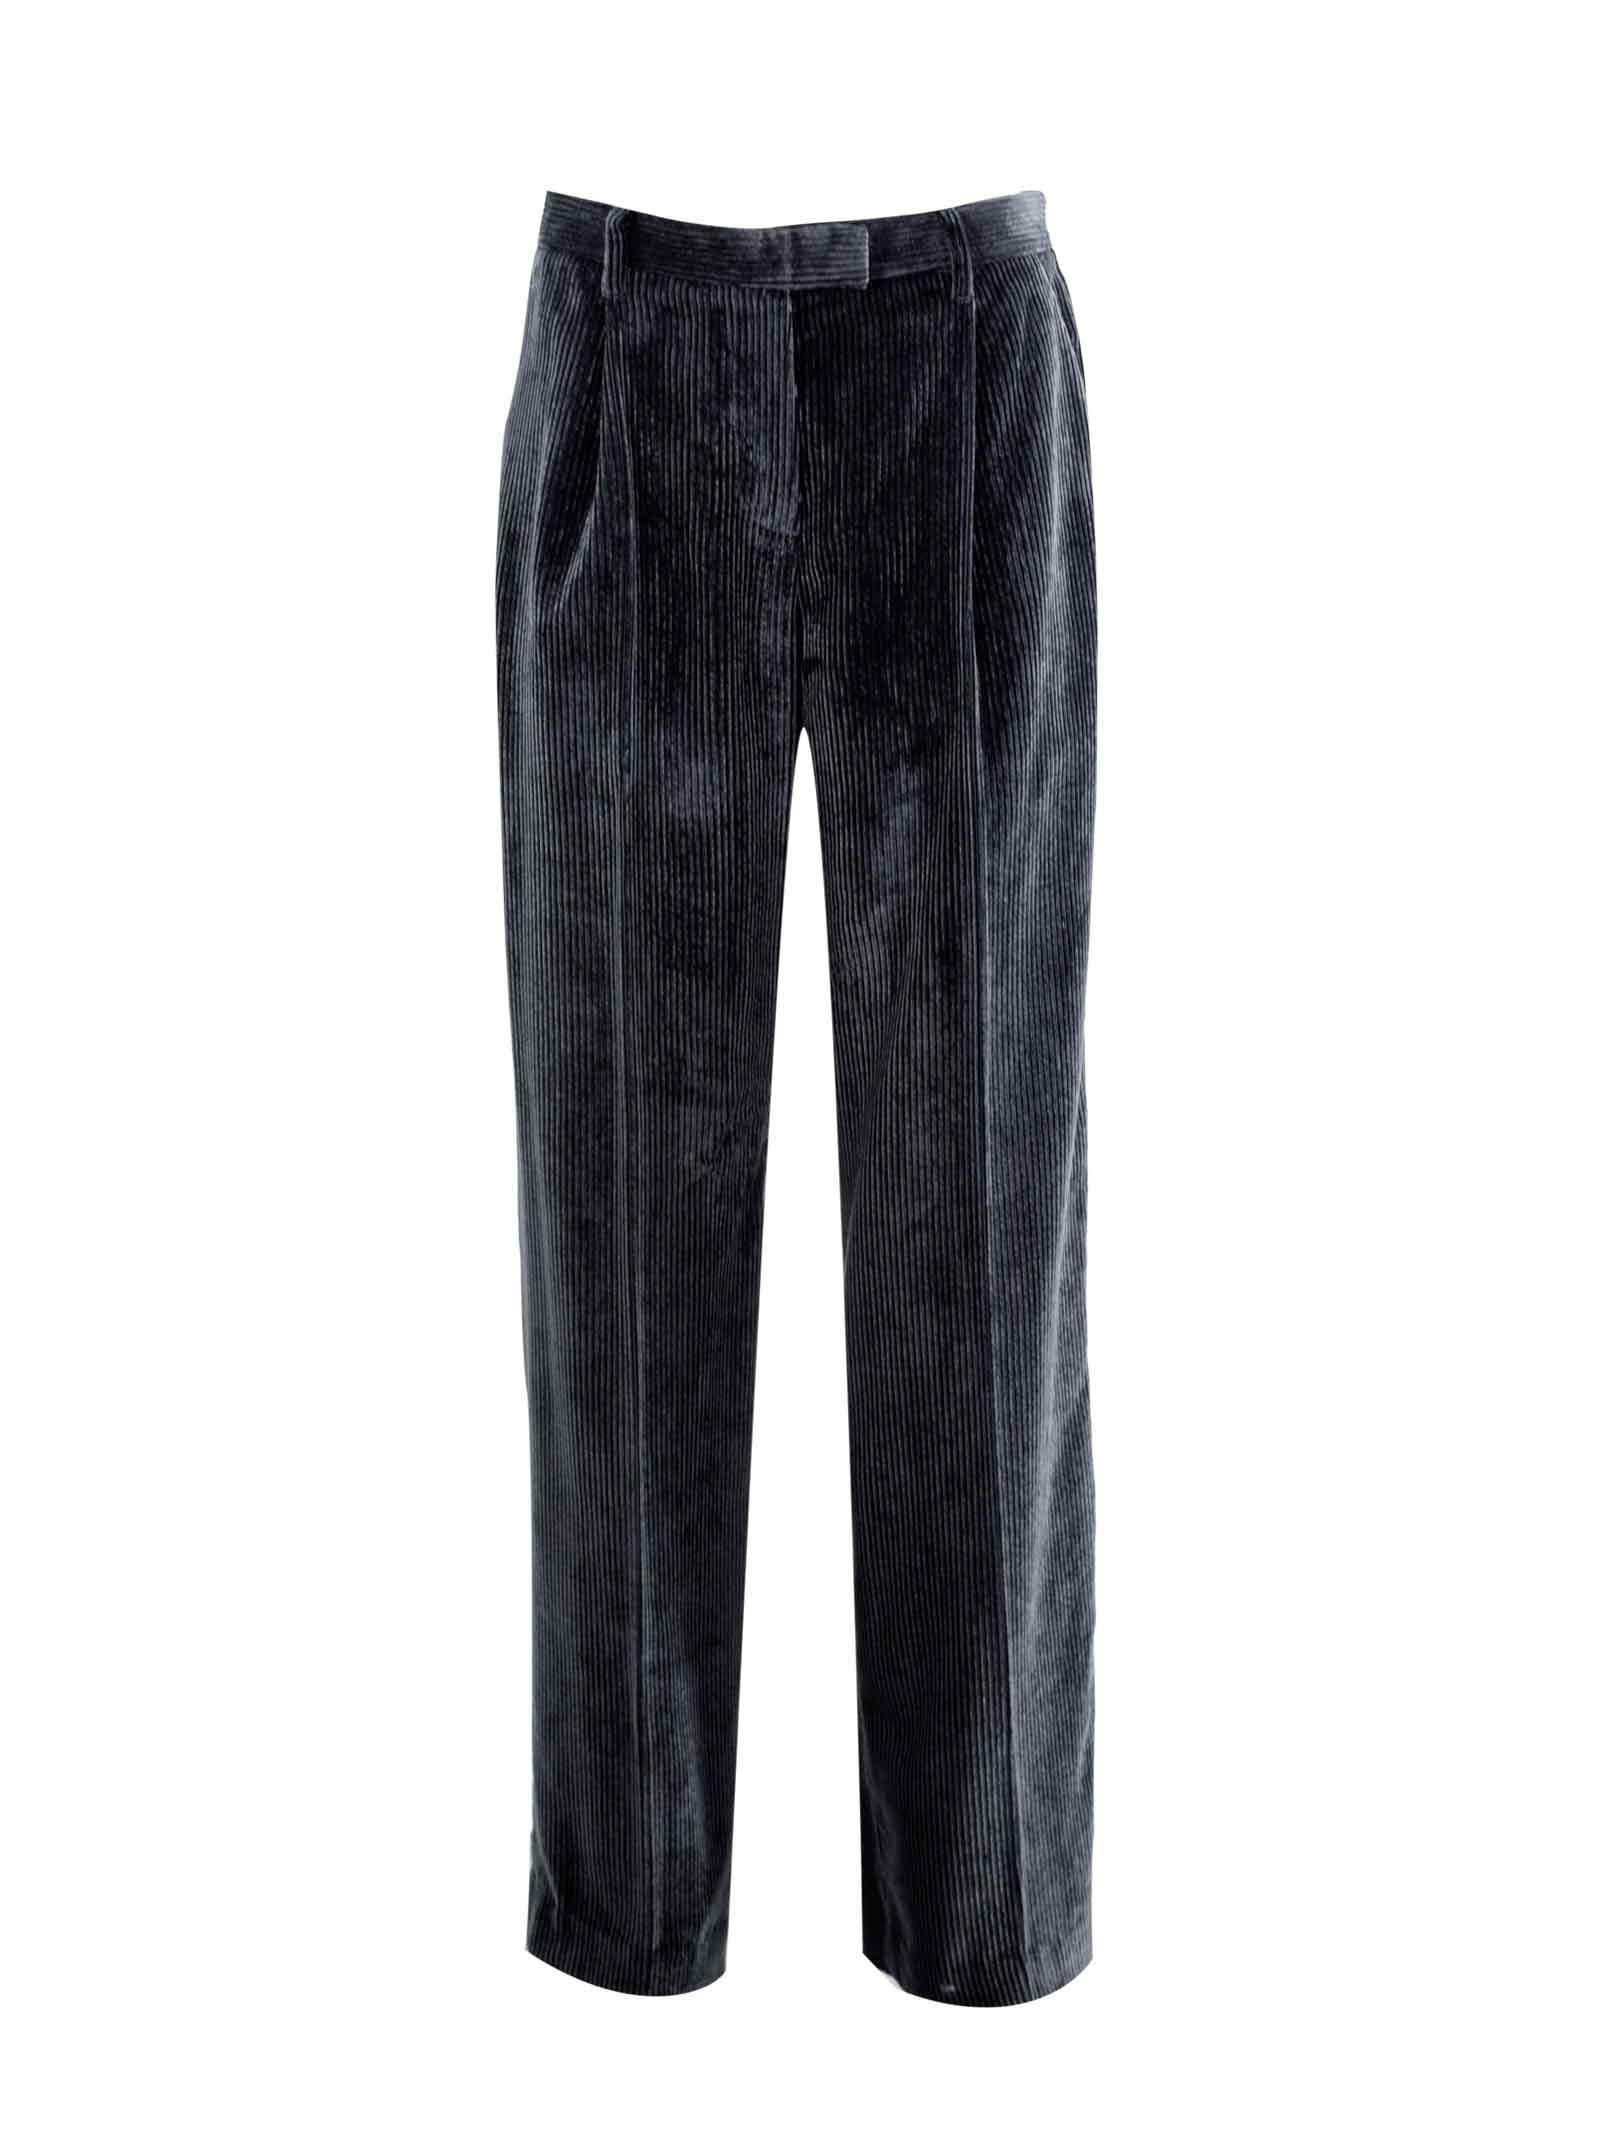 BRUNELLO CUCINELLI CORDUROY TAPERED TROUSERS